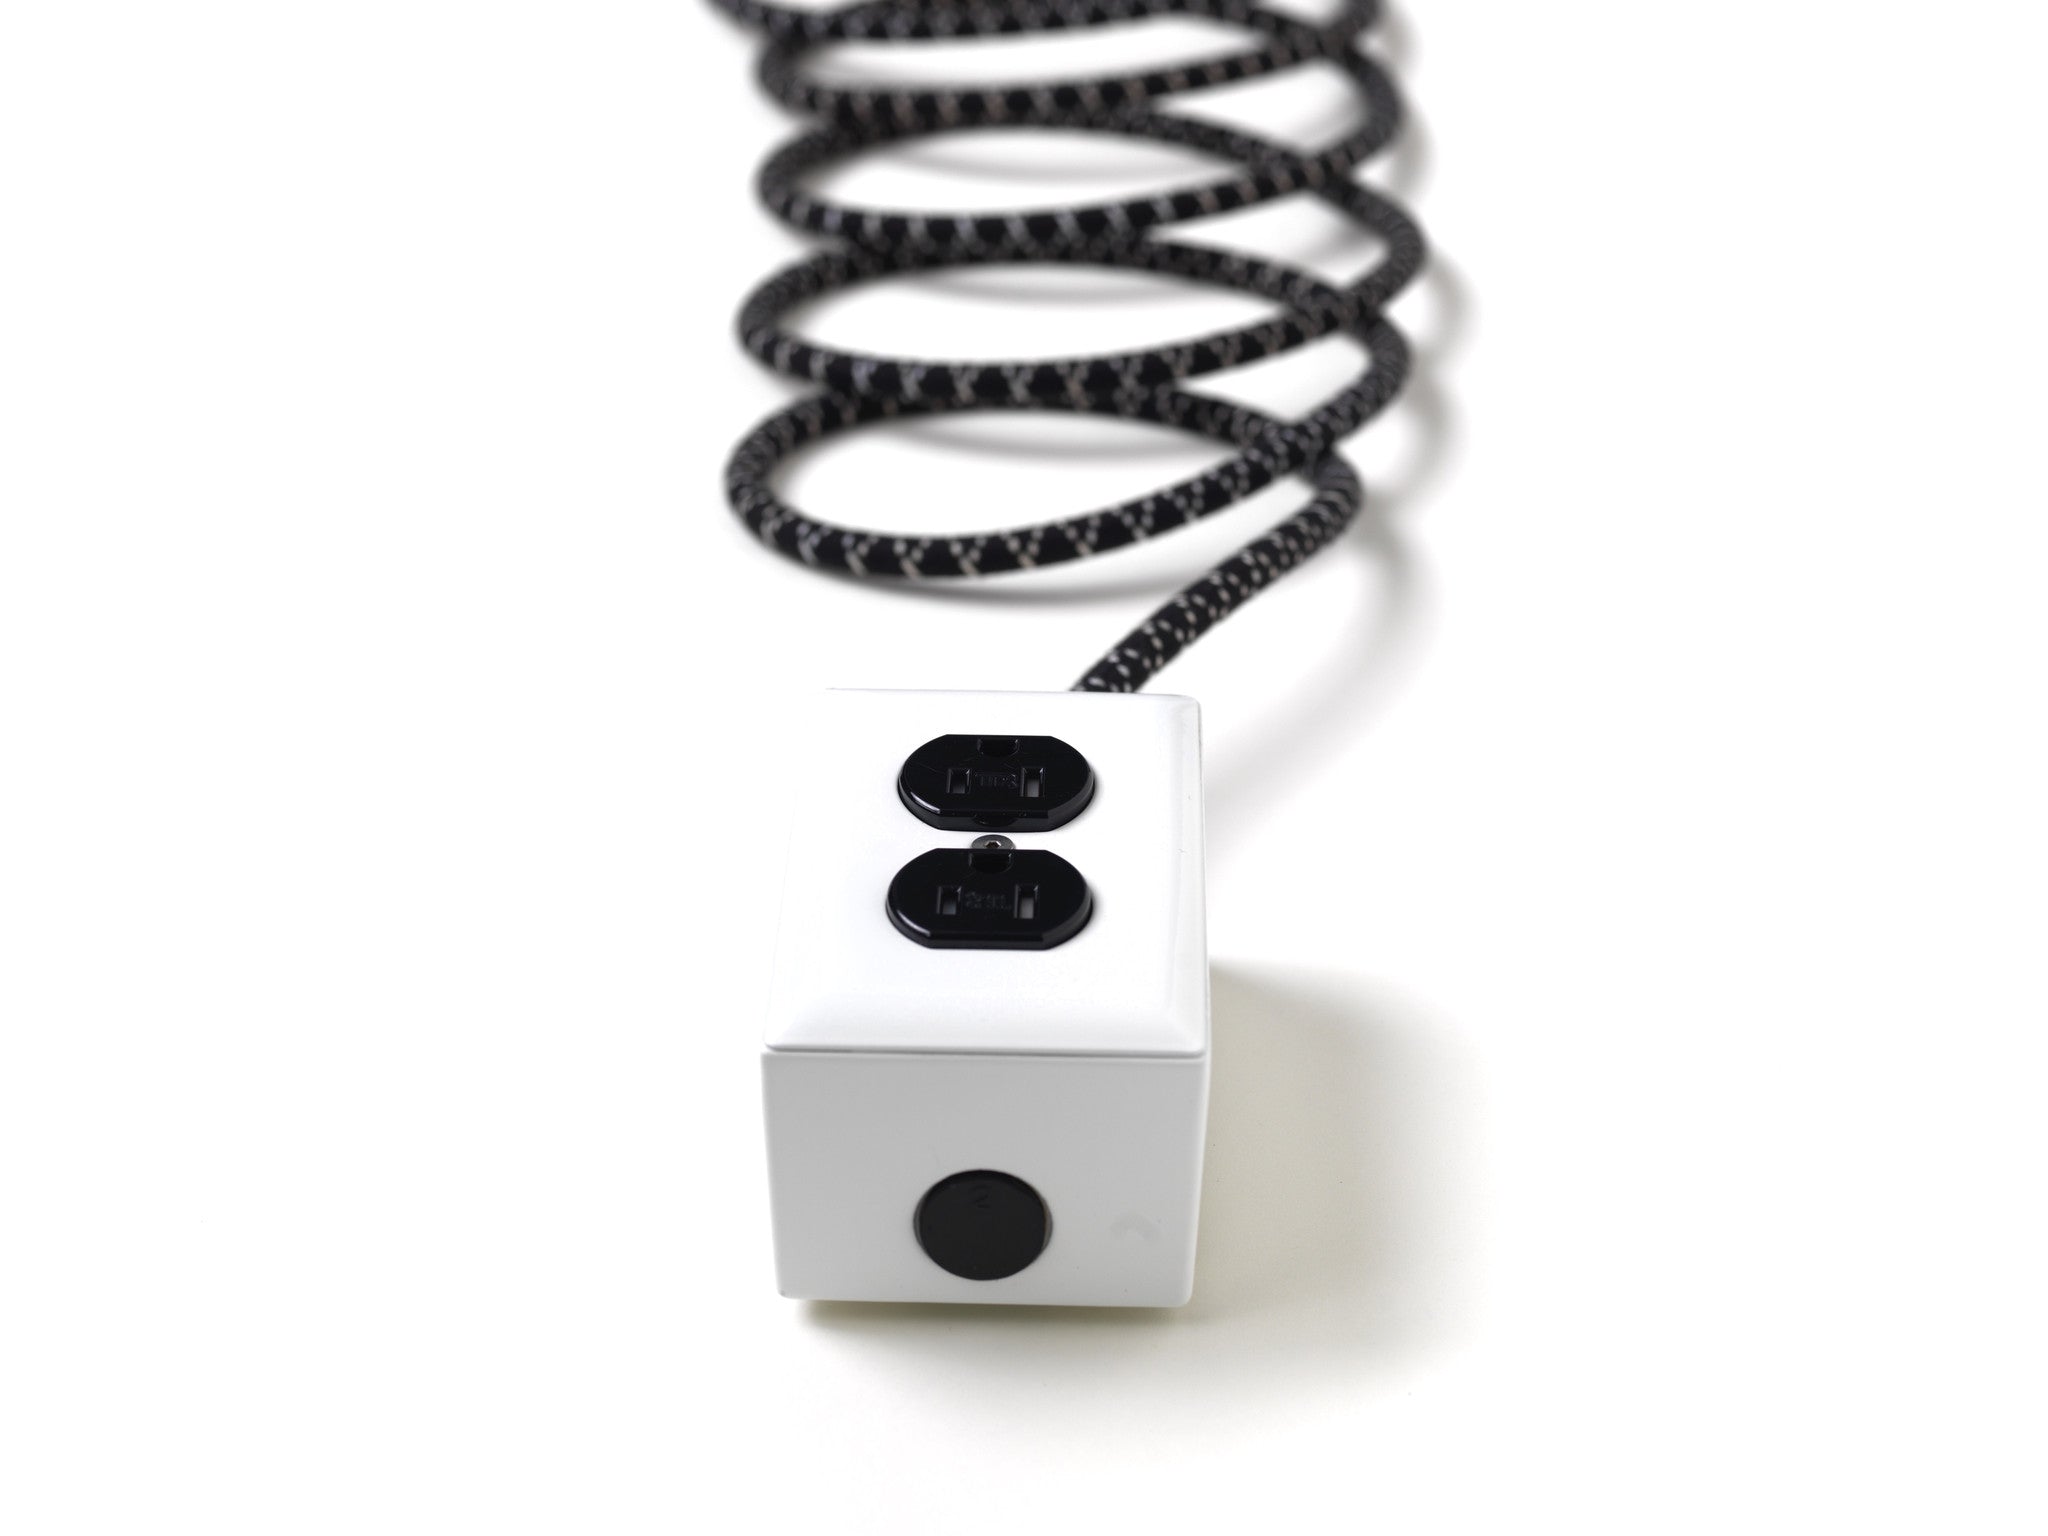 Extō AC/DC Black & White - A Modern Dual-Tamper-Resistant Outlet, 15-AMP Extension Cord